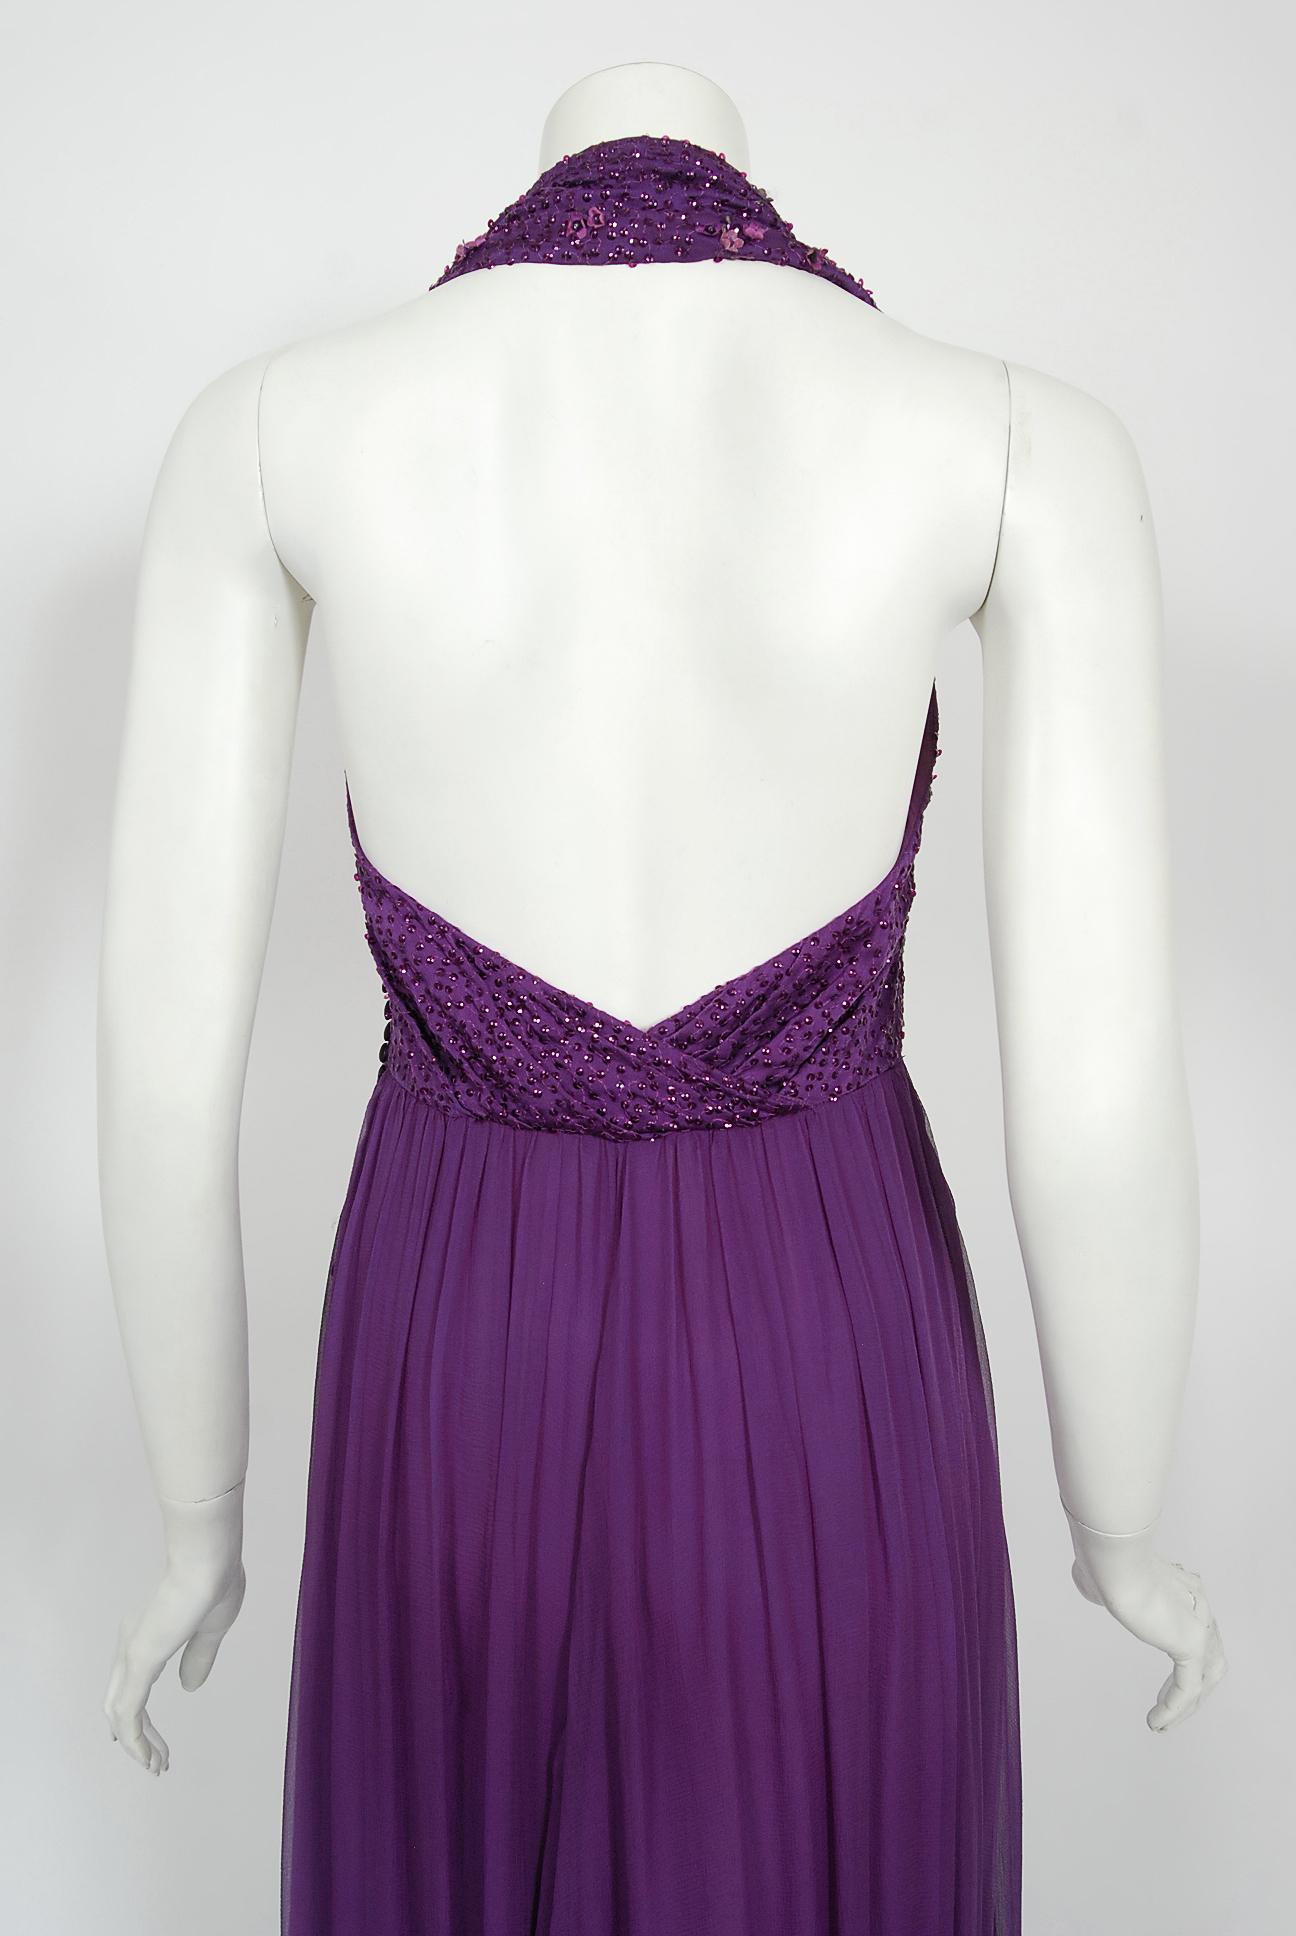 Vintage 2009 Christian Dior by Galliano Beaded Purple Silk Halter Backless Gown 8